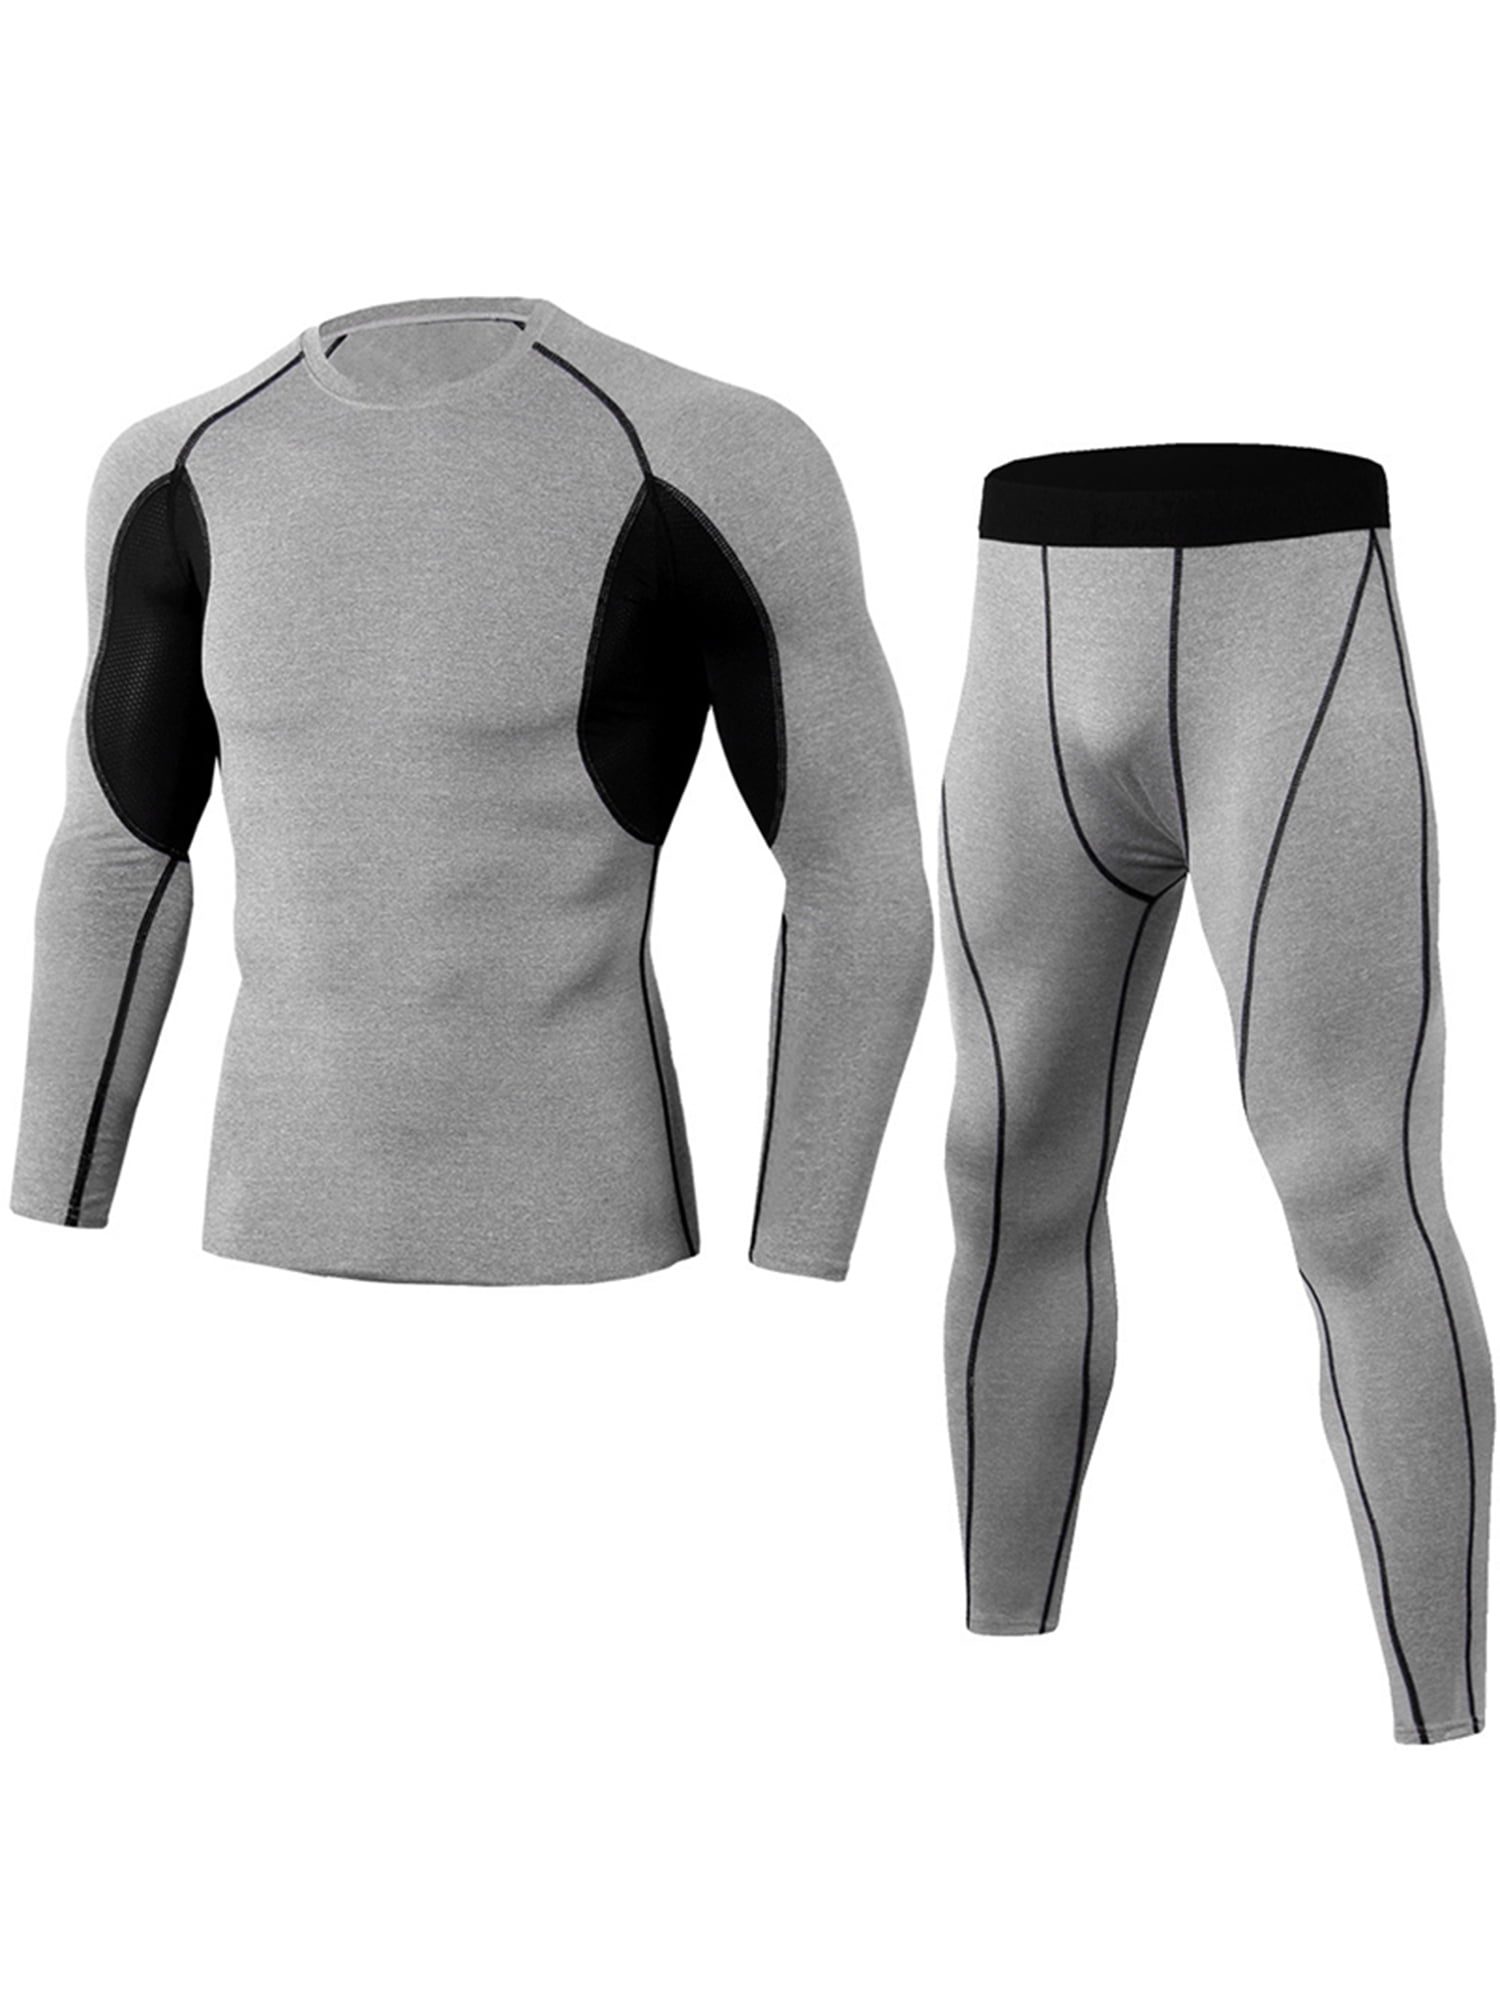 ALQYST Compression Clothing Men T Shirt + Leggings Long Sleeved Top Base  Kit For Man Fitness Workout Thermal Underwear,Gray - suit,XL price in UAE,  UAE